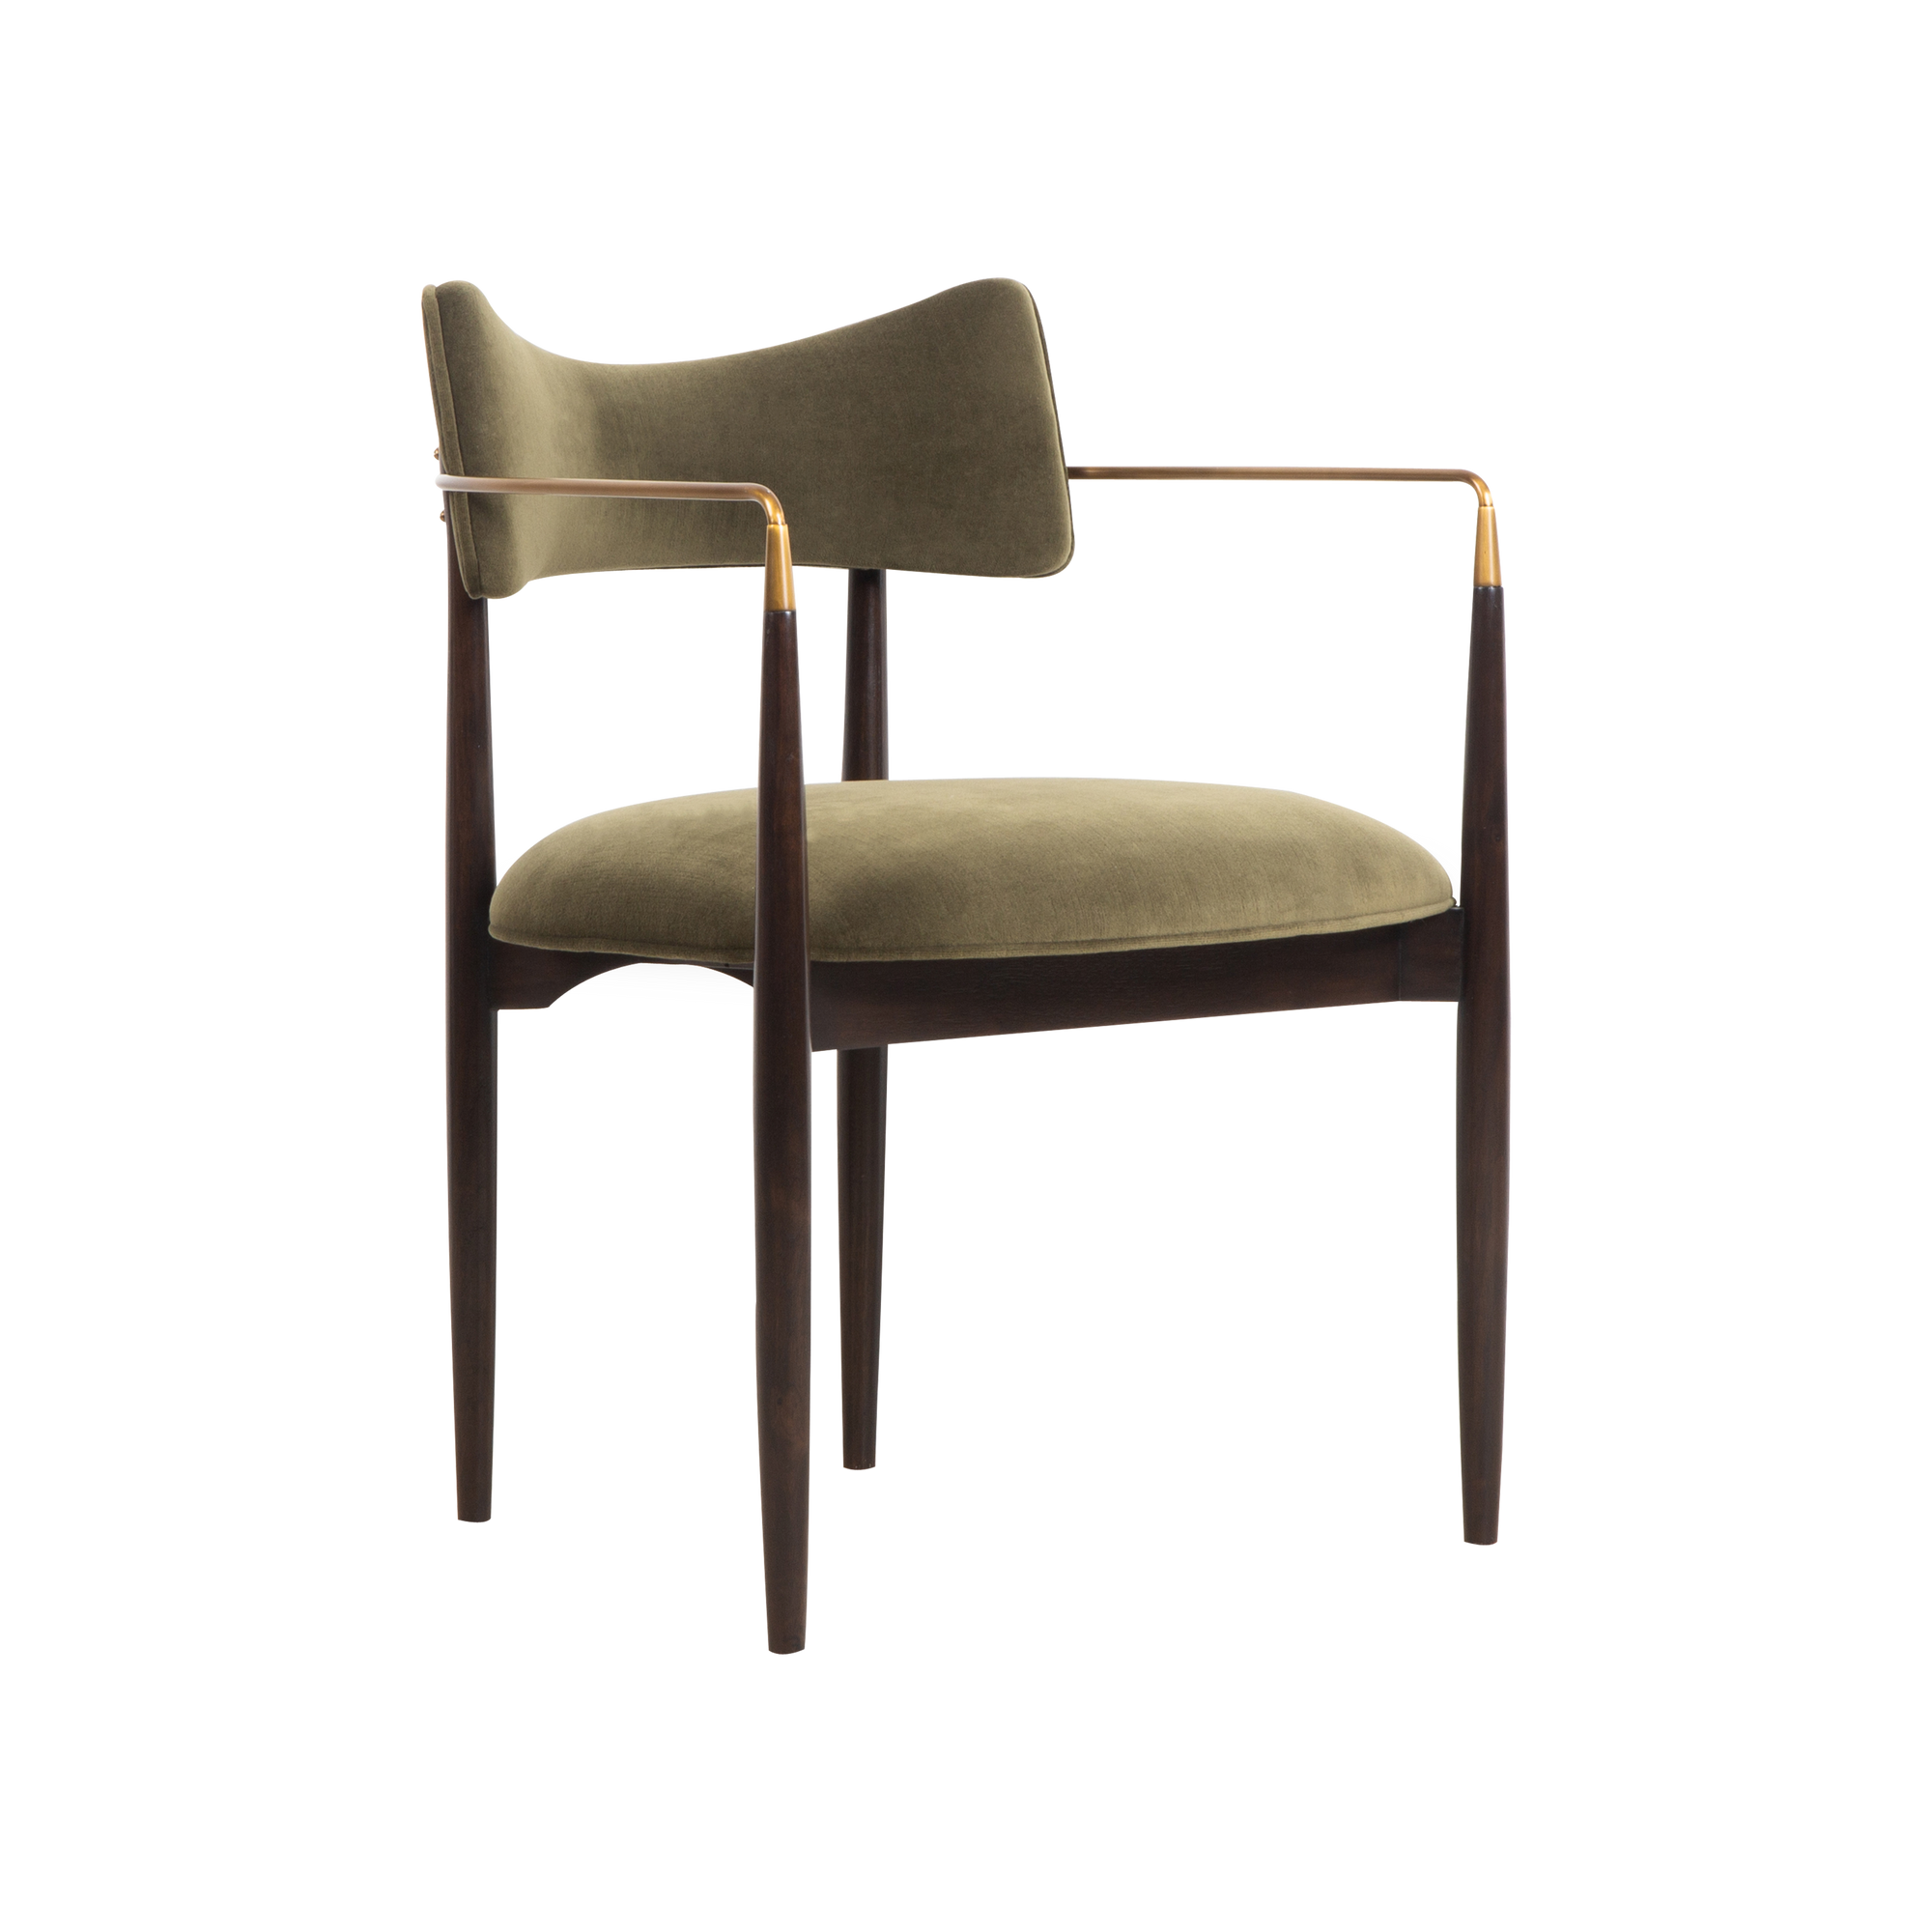 With its crisp modern look, the Durrant Armchair makes no compromise to comfort.